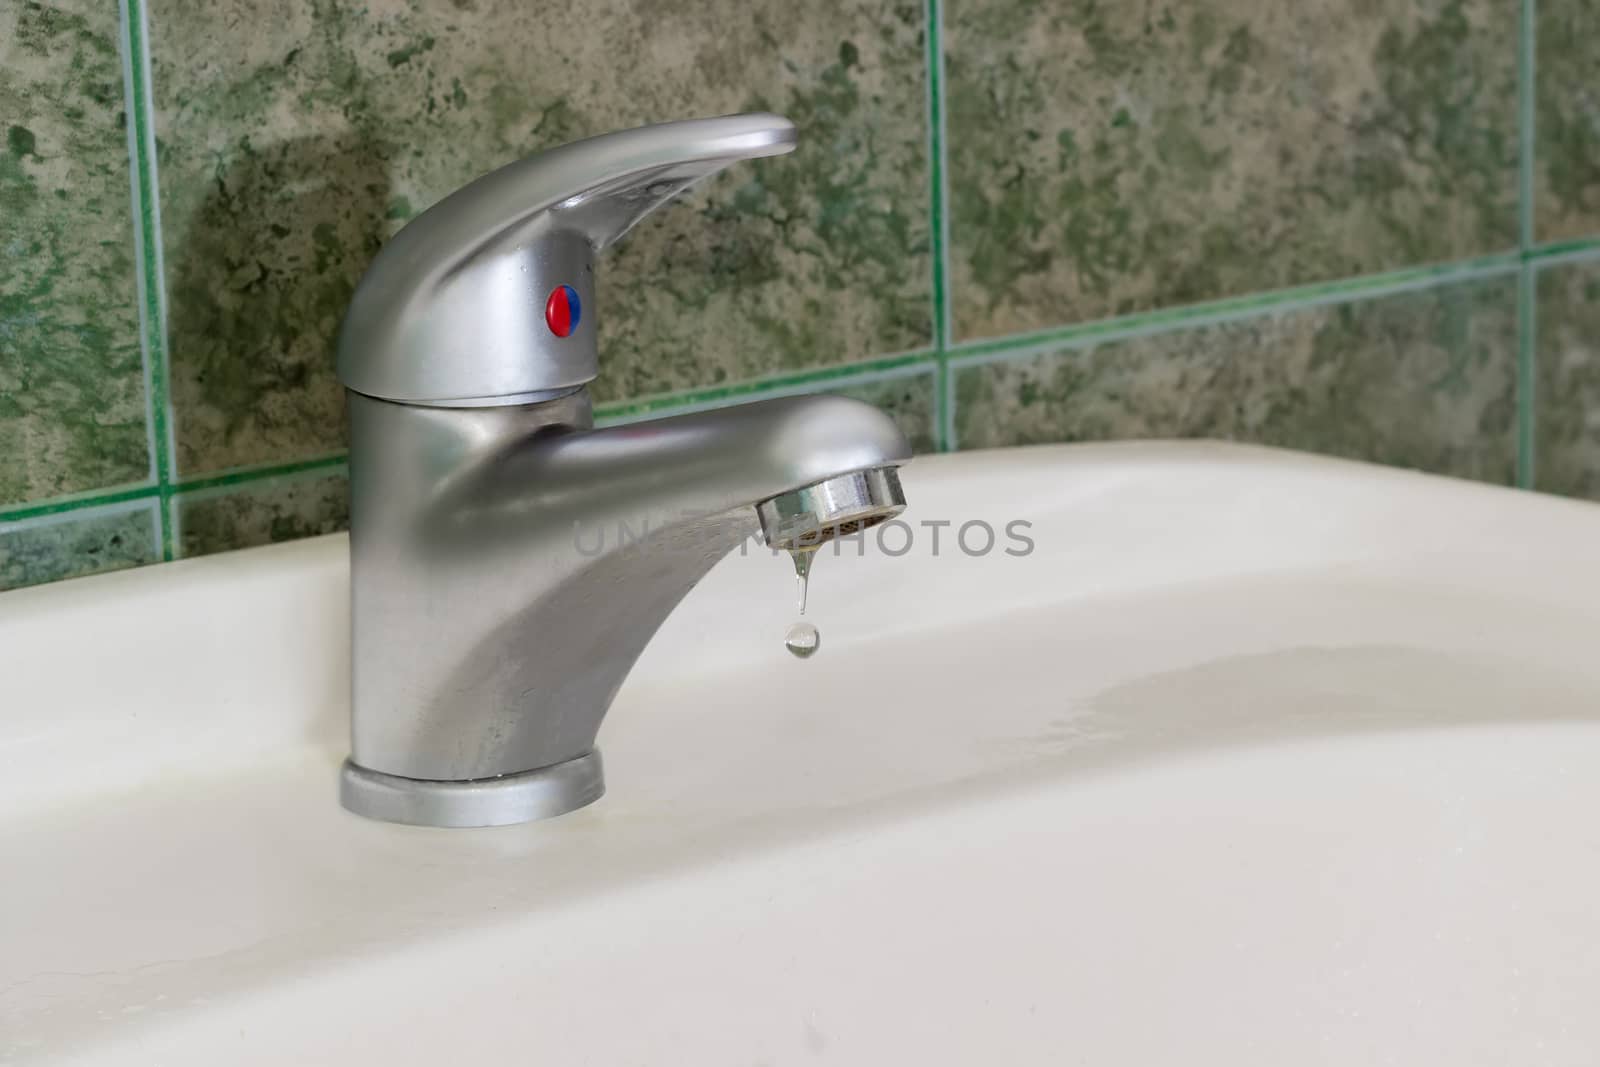 Drop of water from the single handle mixer tap mounted on a wash basin on background of a wall with green tiles
